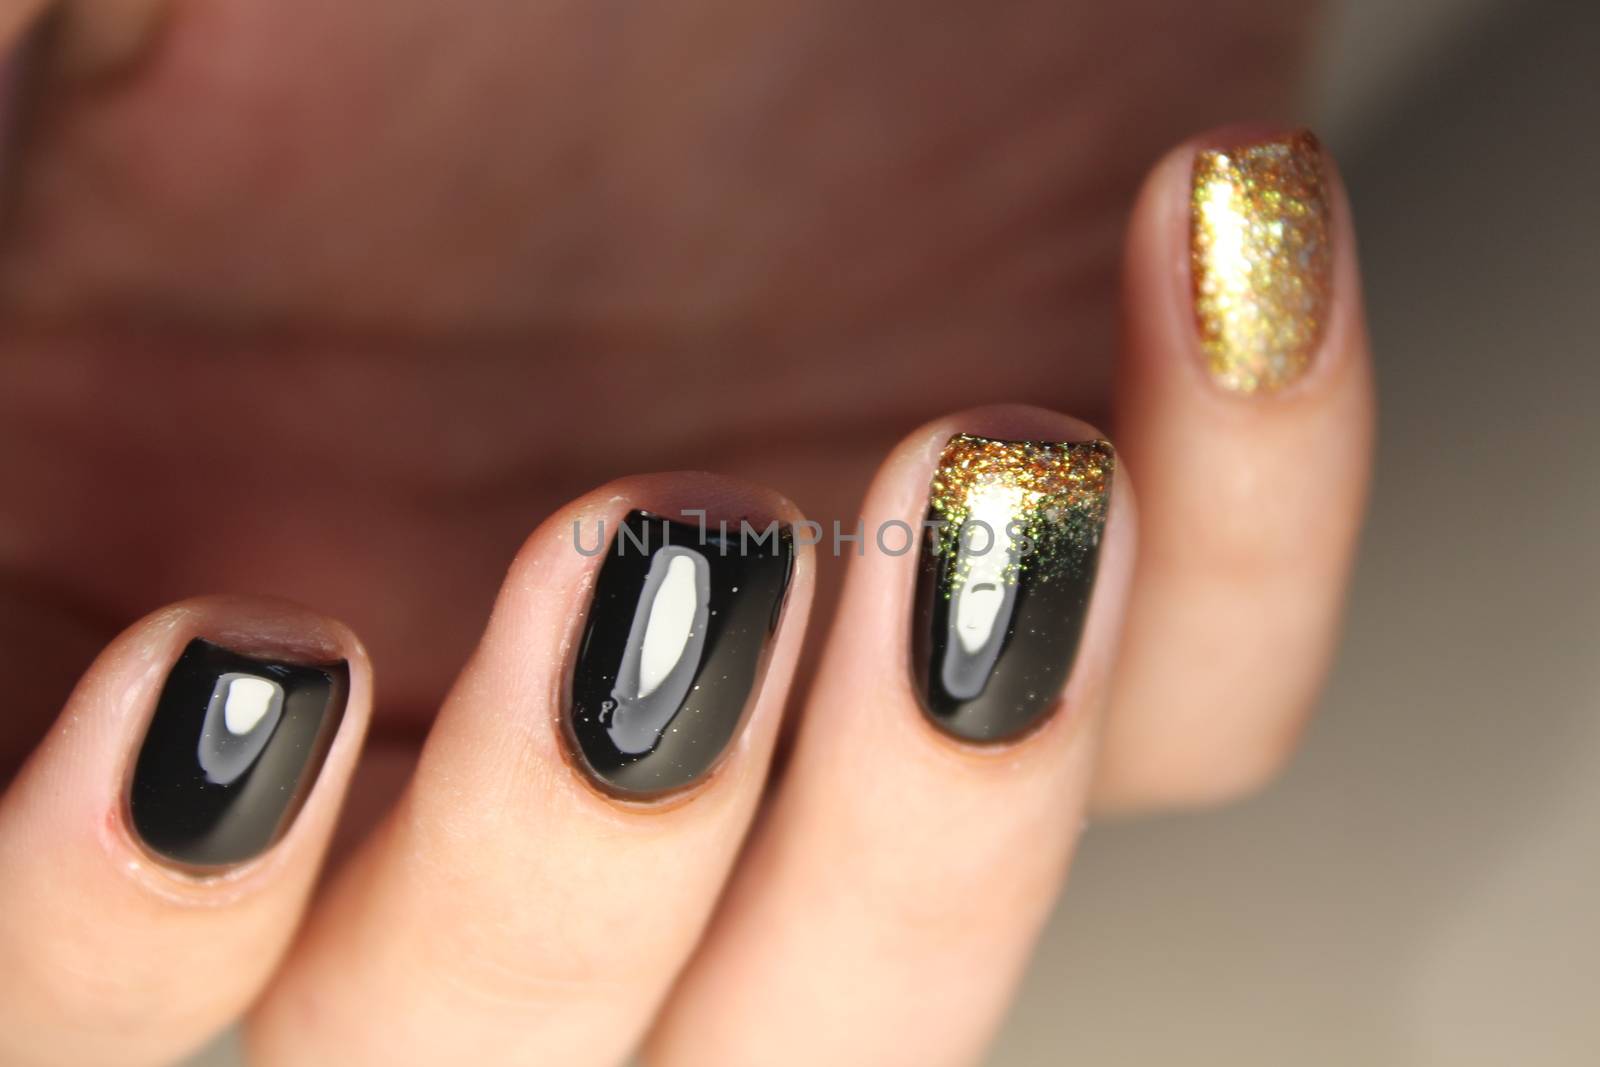 manicure design black and gold color by SmirMaxStock